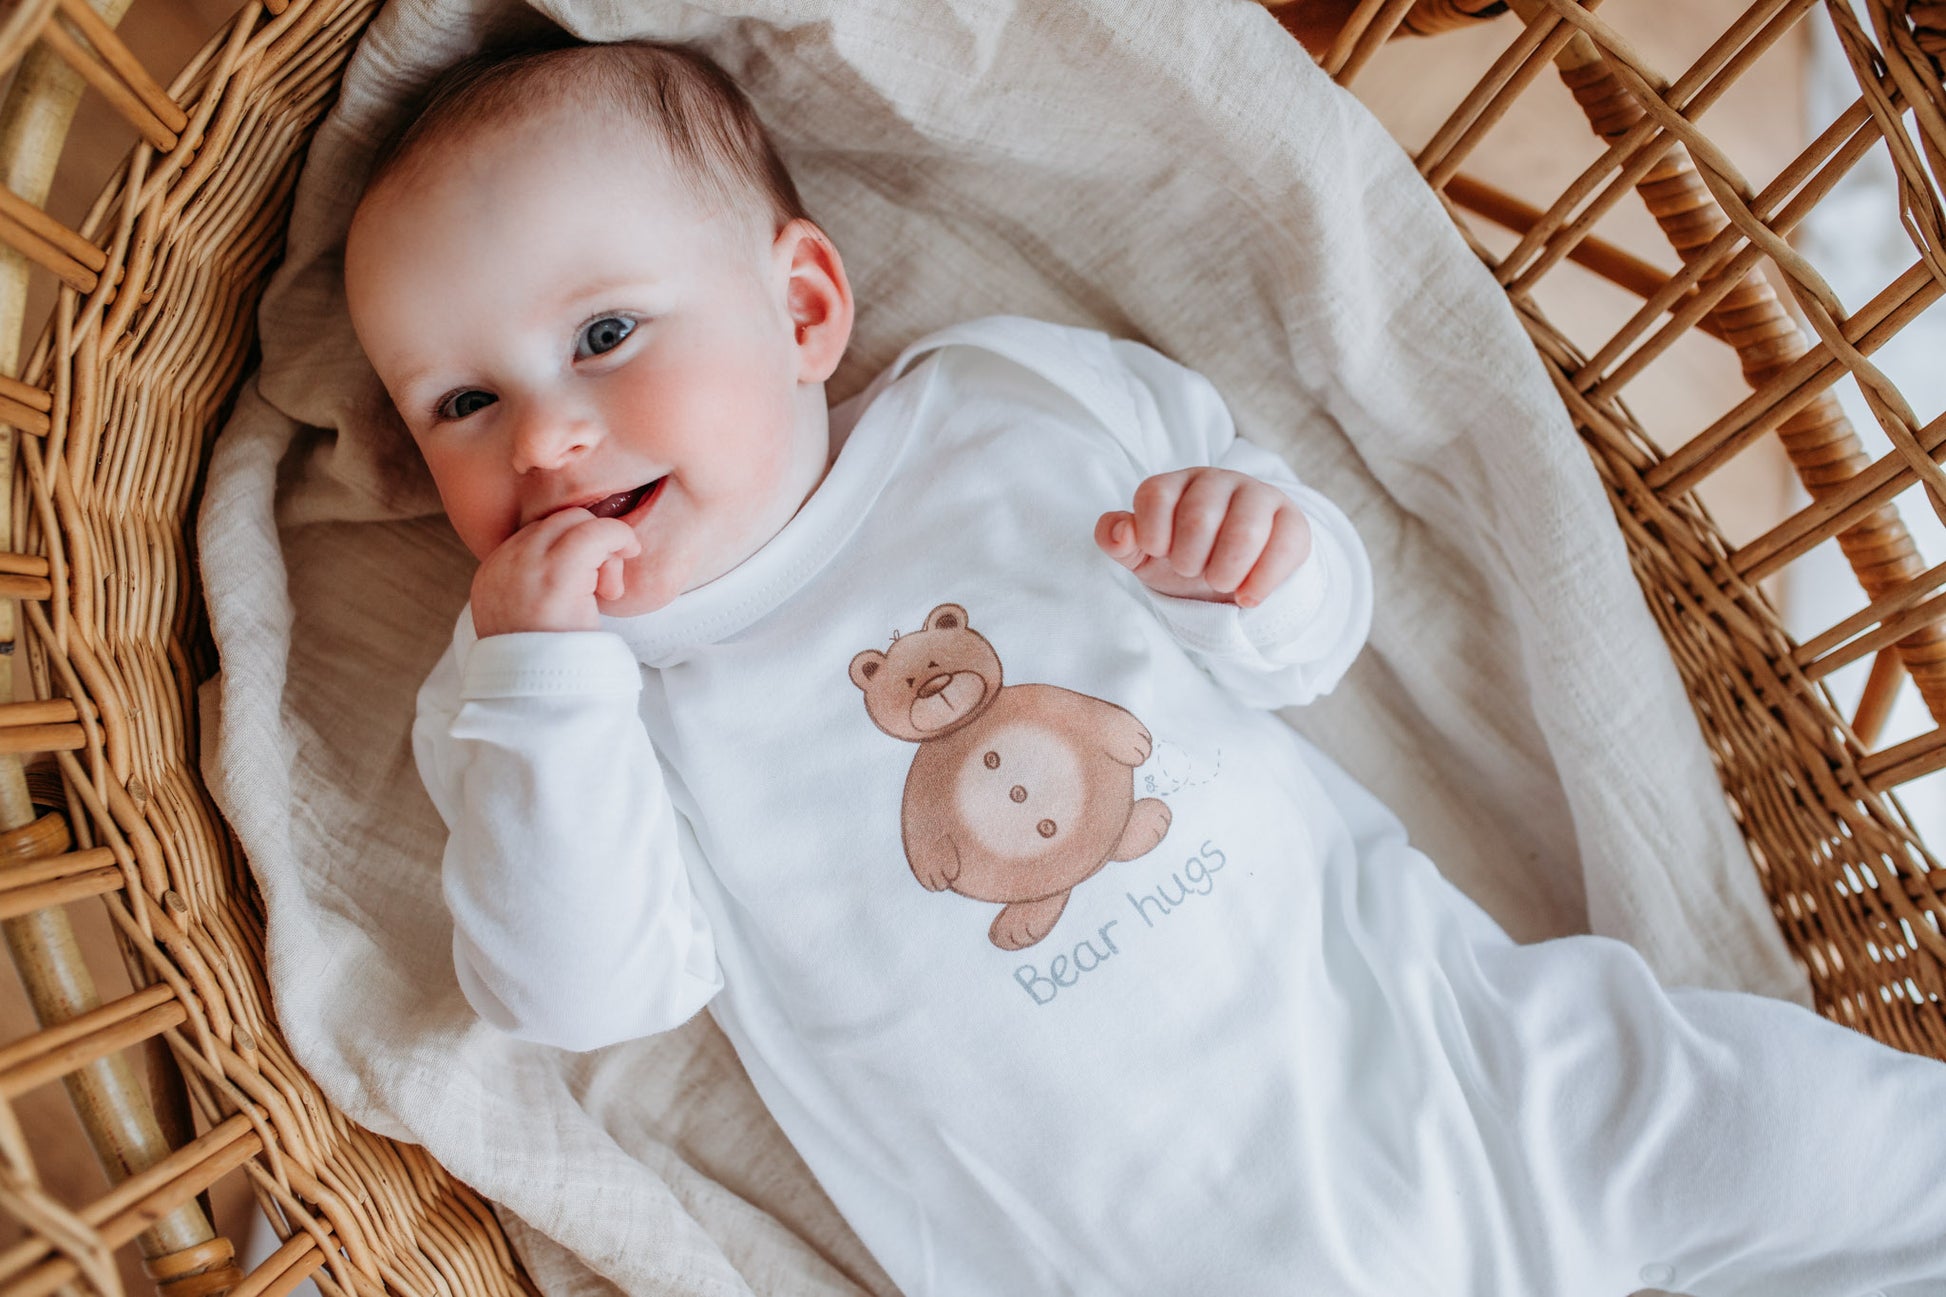 newborn baby laying in a moses basket in soft organic white sleepsuit with woodland bear design and bear hugs motif